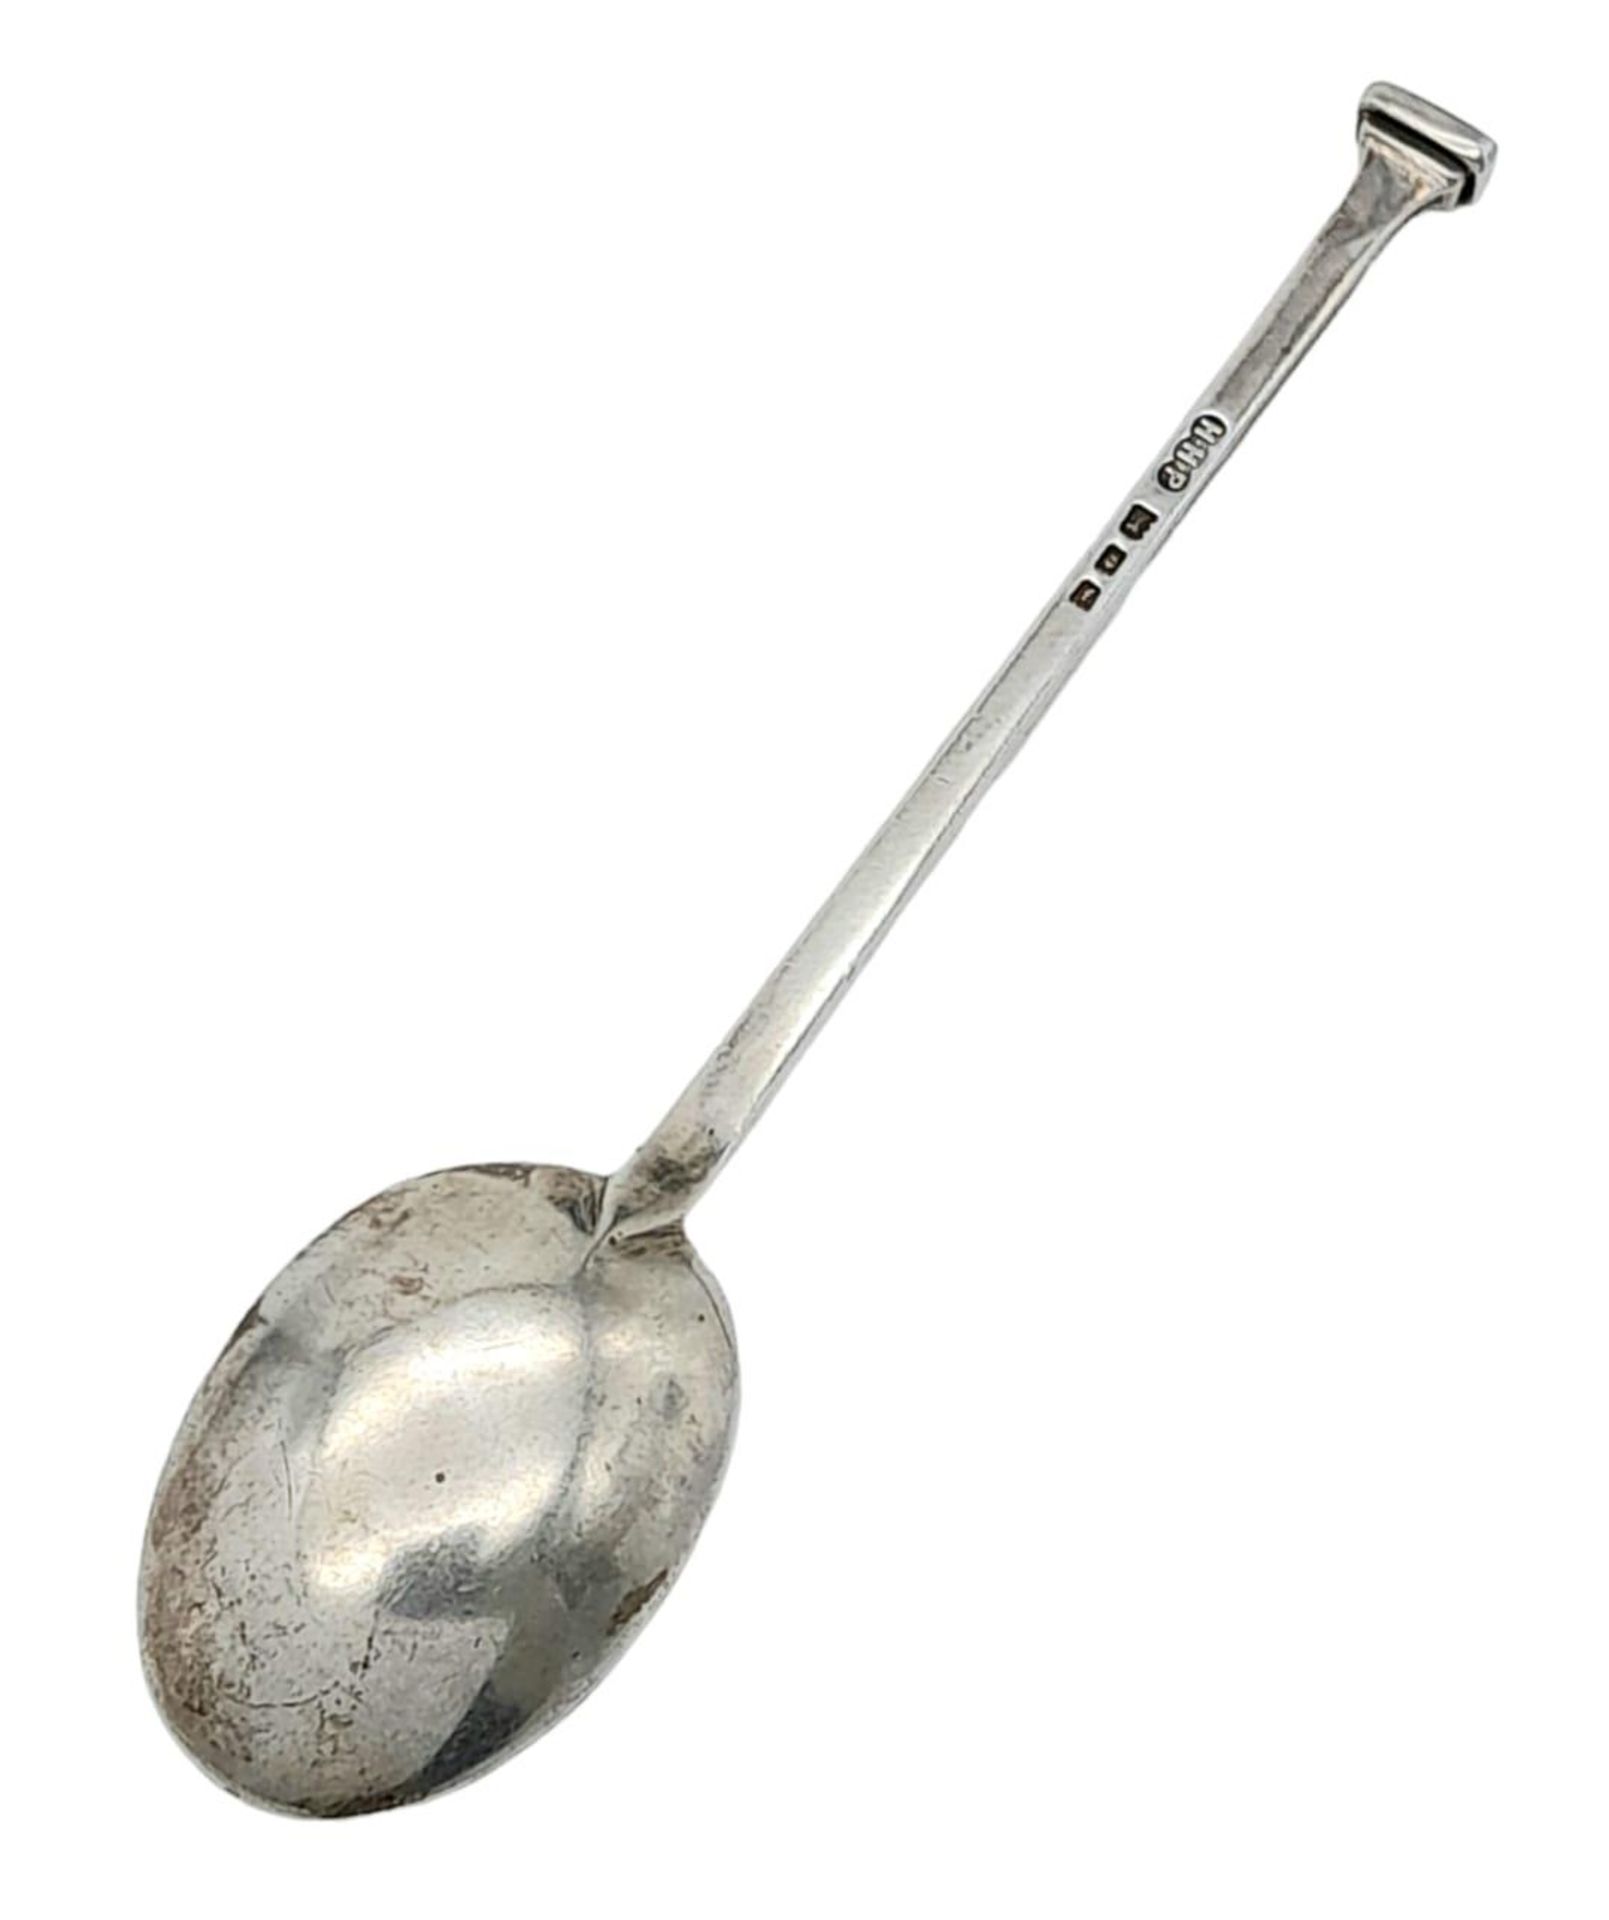 An antique sterling silver commemorative spoon with full London hallmarks, 1921. Total weight 12.8G. - Image 5 of 6